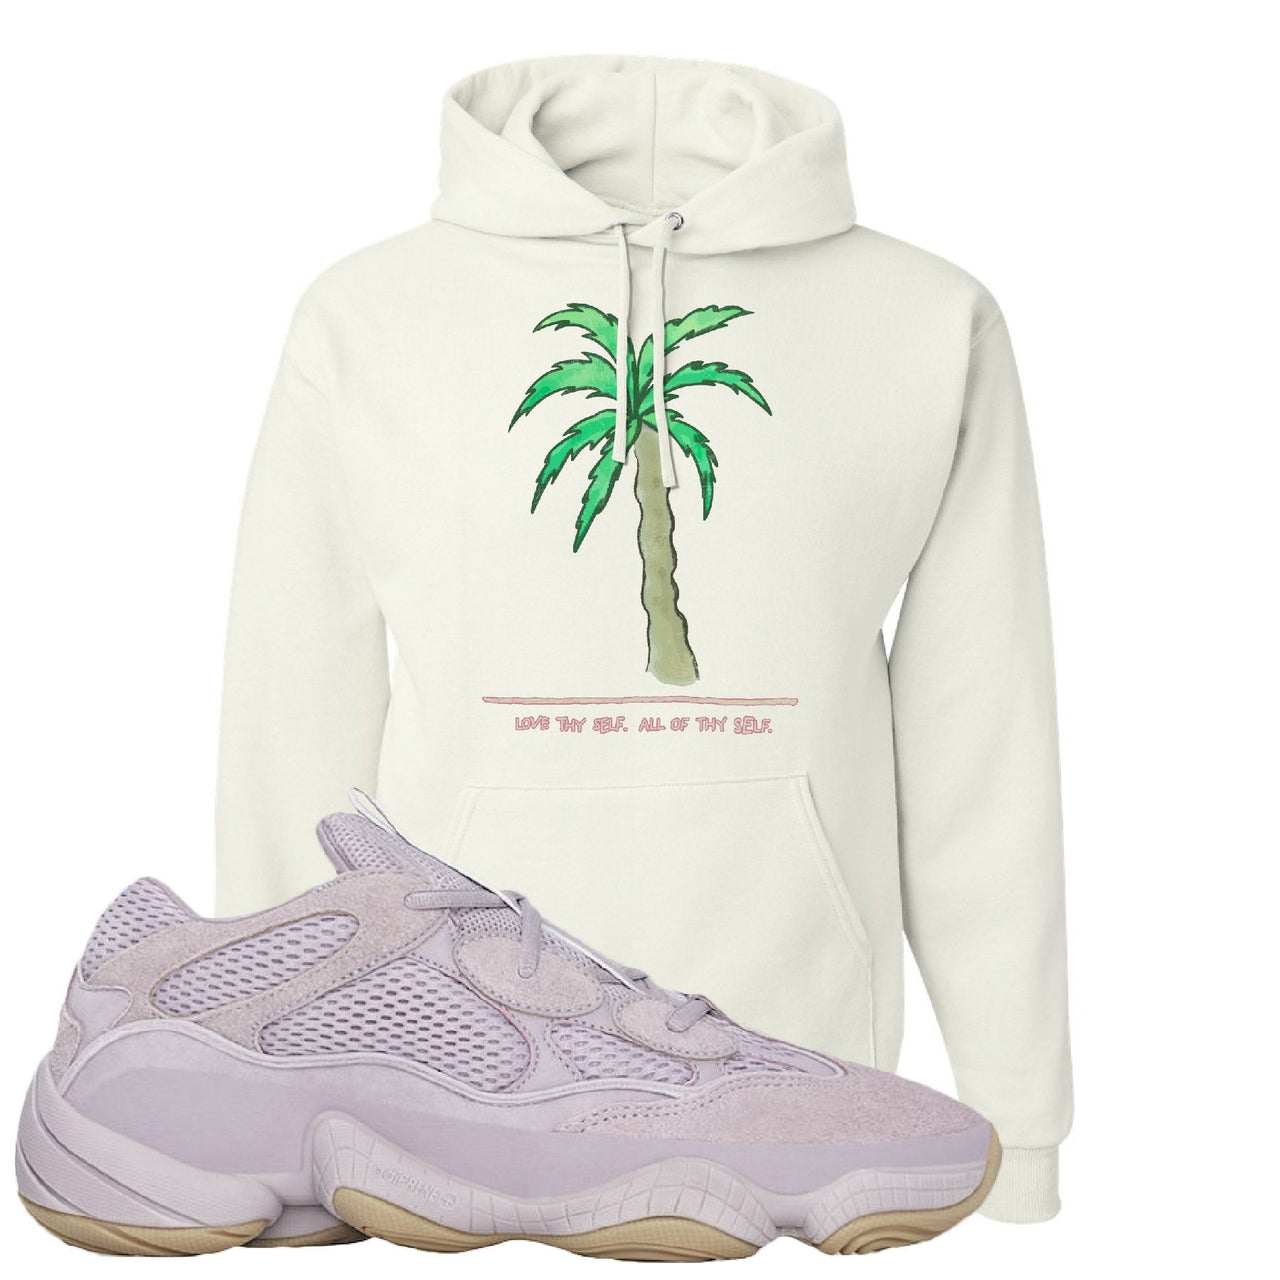 Yeezy 500 Soft Vision Love Thyself Palm White Sneaker Hook Up Pullover Hoodie